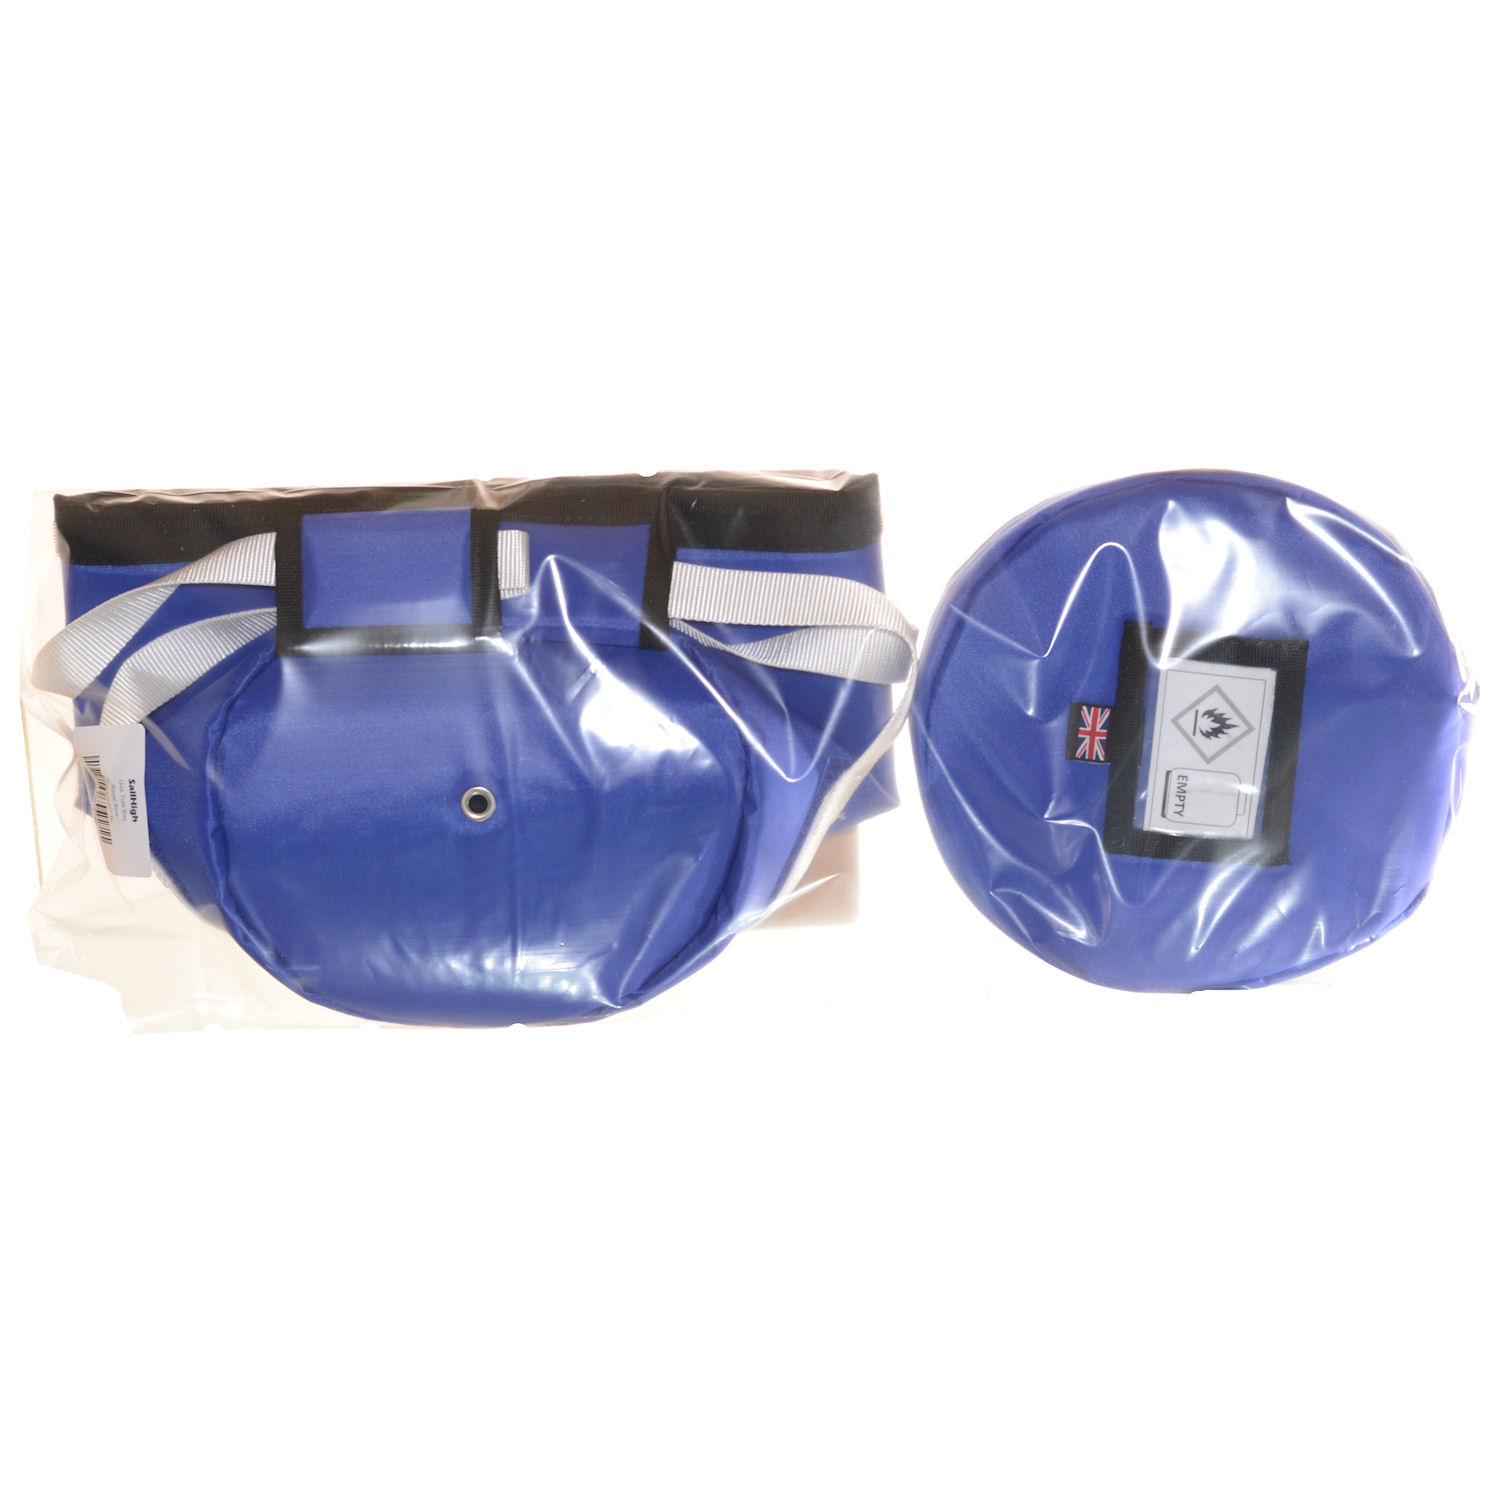 Padded Carry and Storage Bag for Camping Gaz gas 907 Cylinders Marine Boat Camp